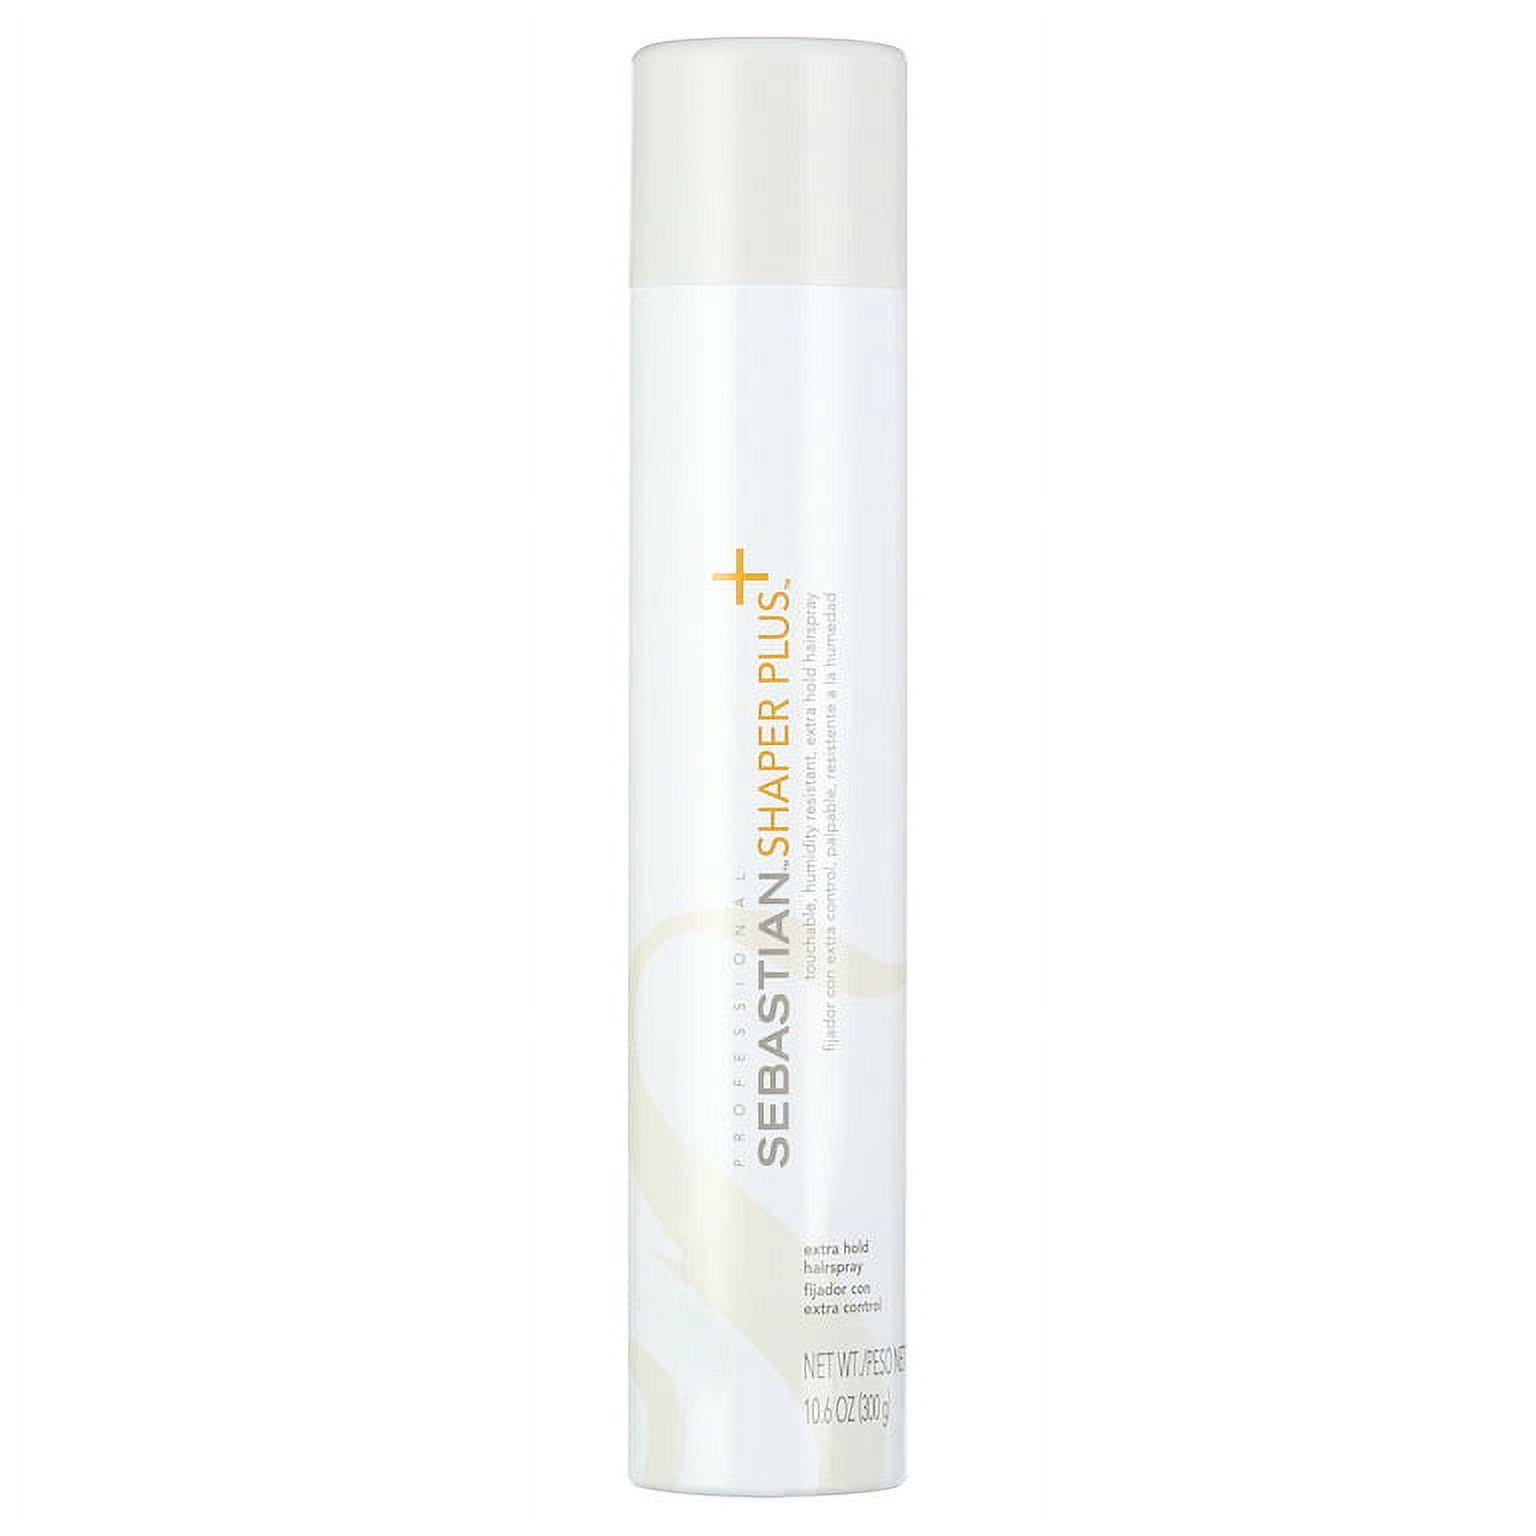 Sebastian Professional Shaper Plus Touchable Humidity Resistant, Extra Hold Hair Spray - 10.6 oz - image 1 of 5